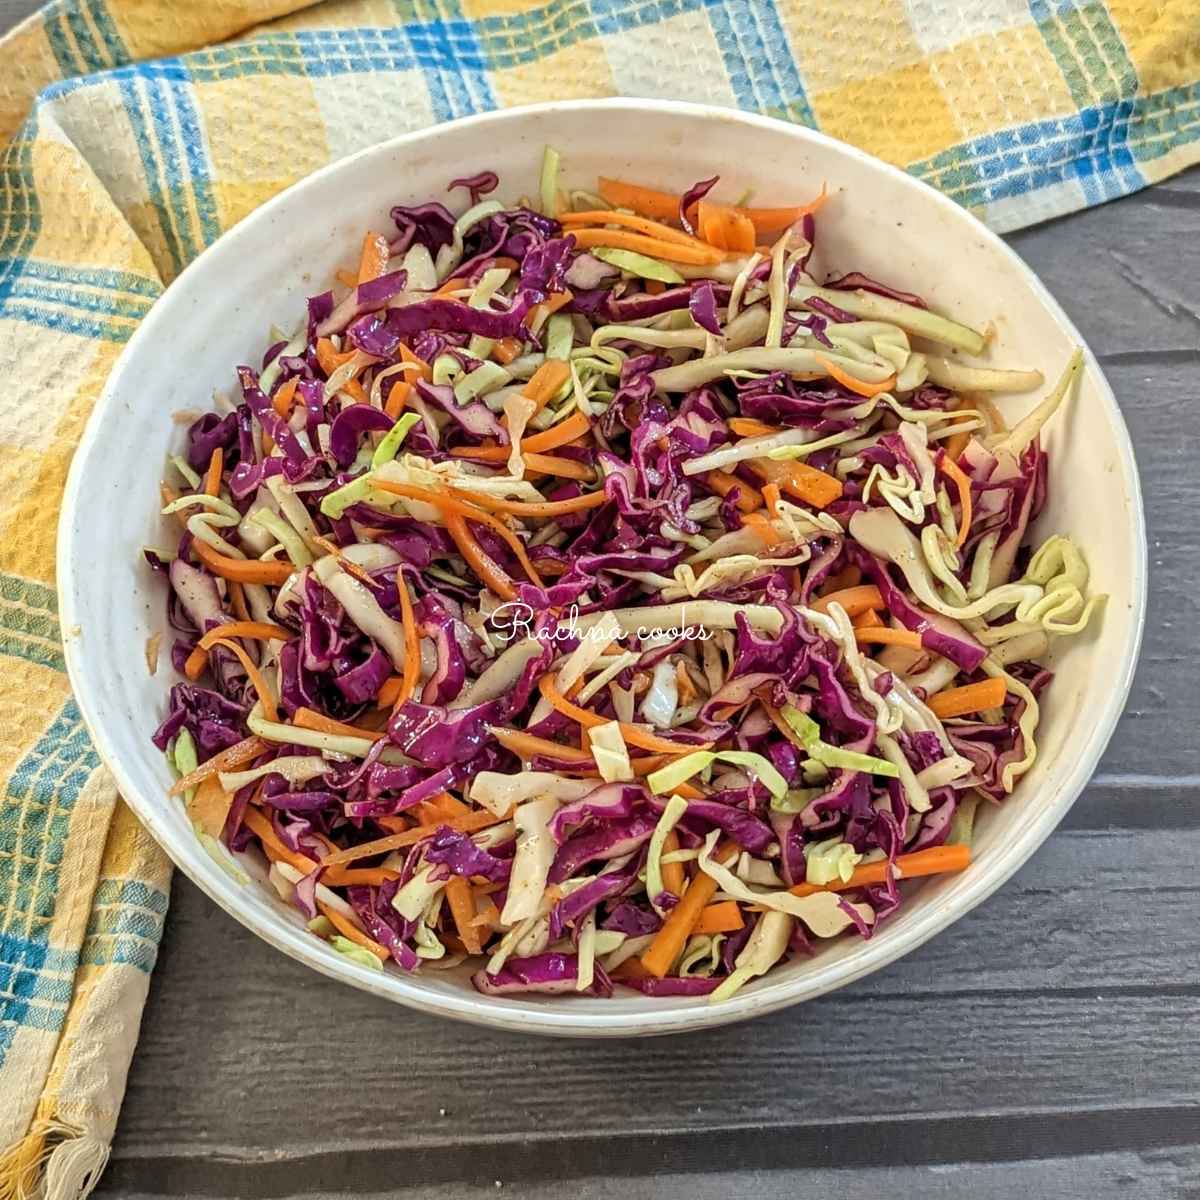 A large bowl of cabbage and carrot salad